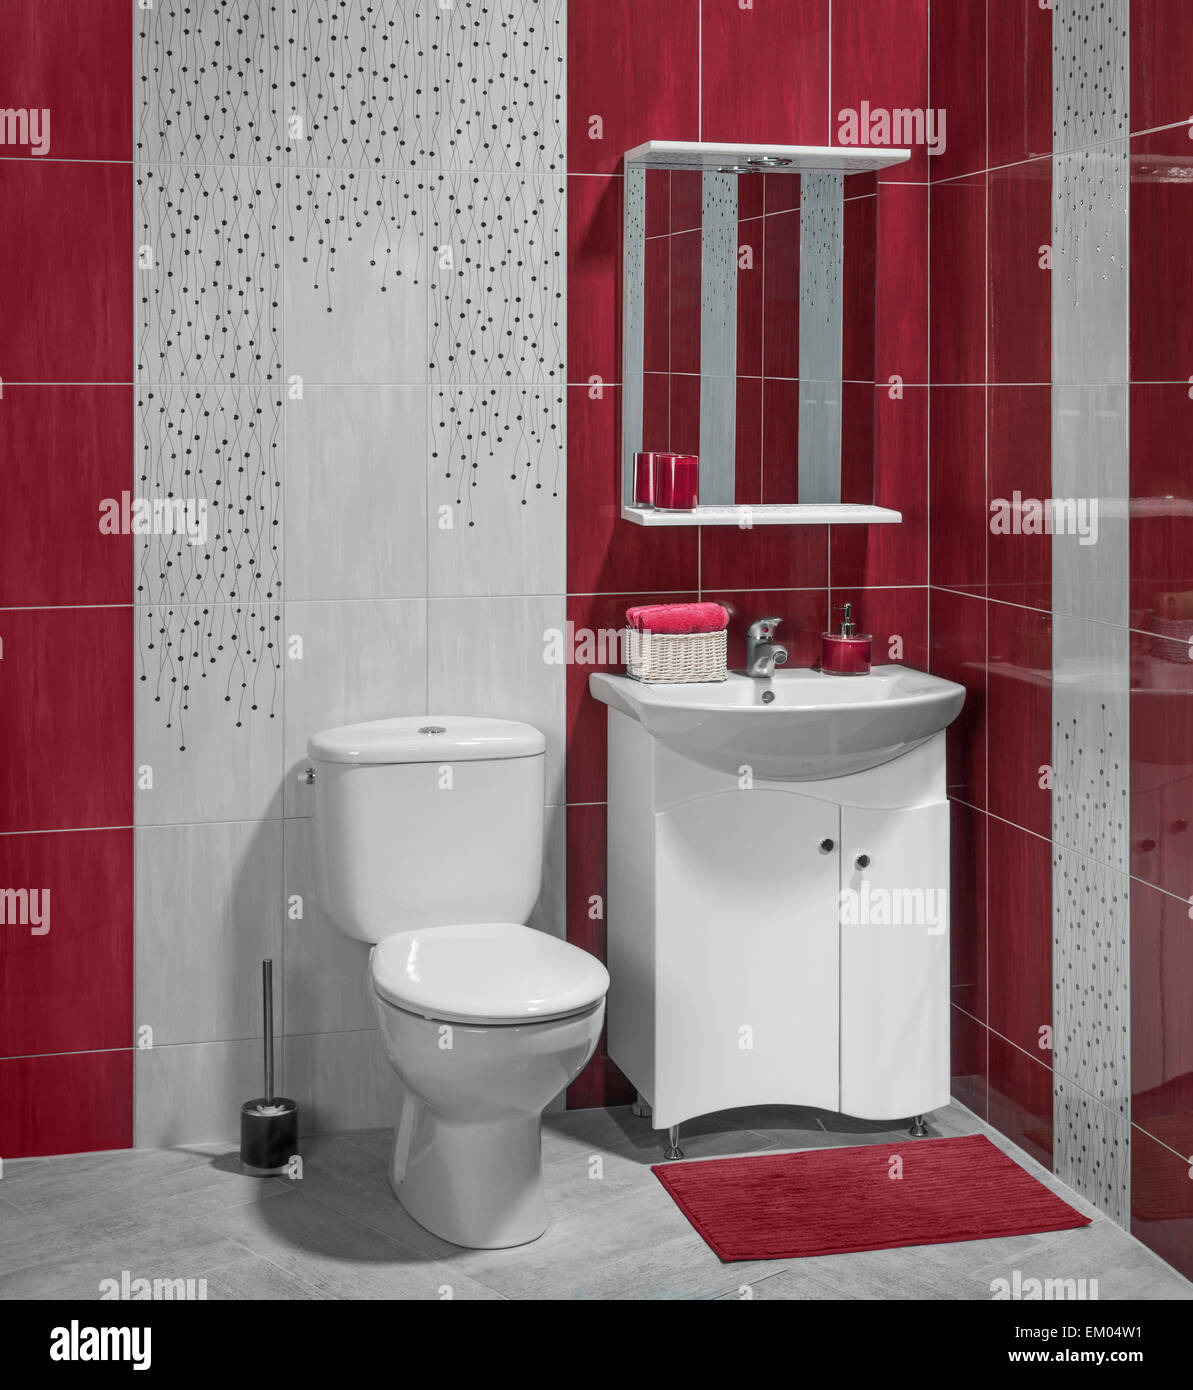 Beautiful interior of bathroom with sink and toilet; decorated with red tiles Stock Photo